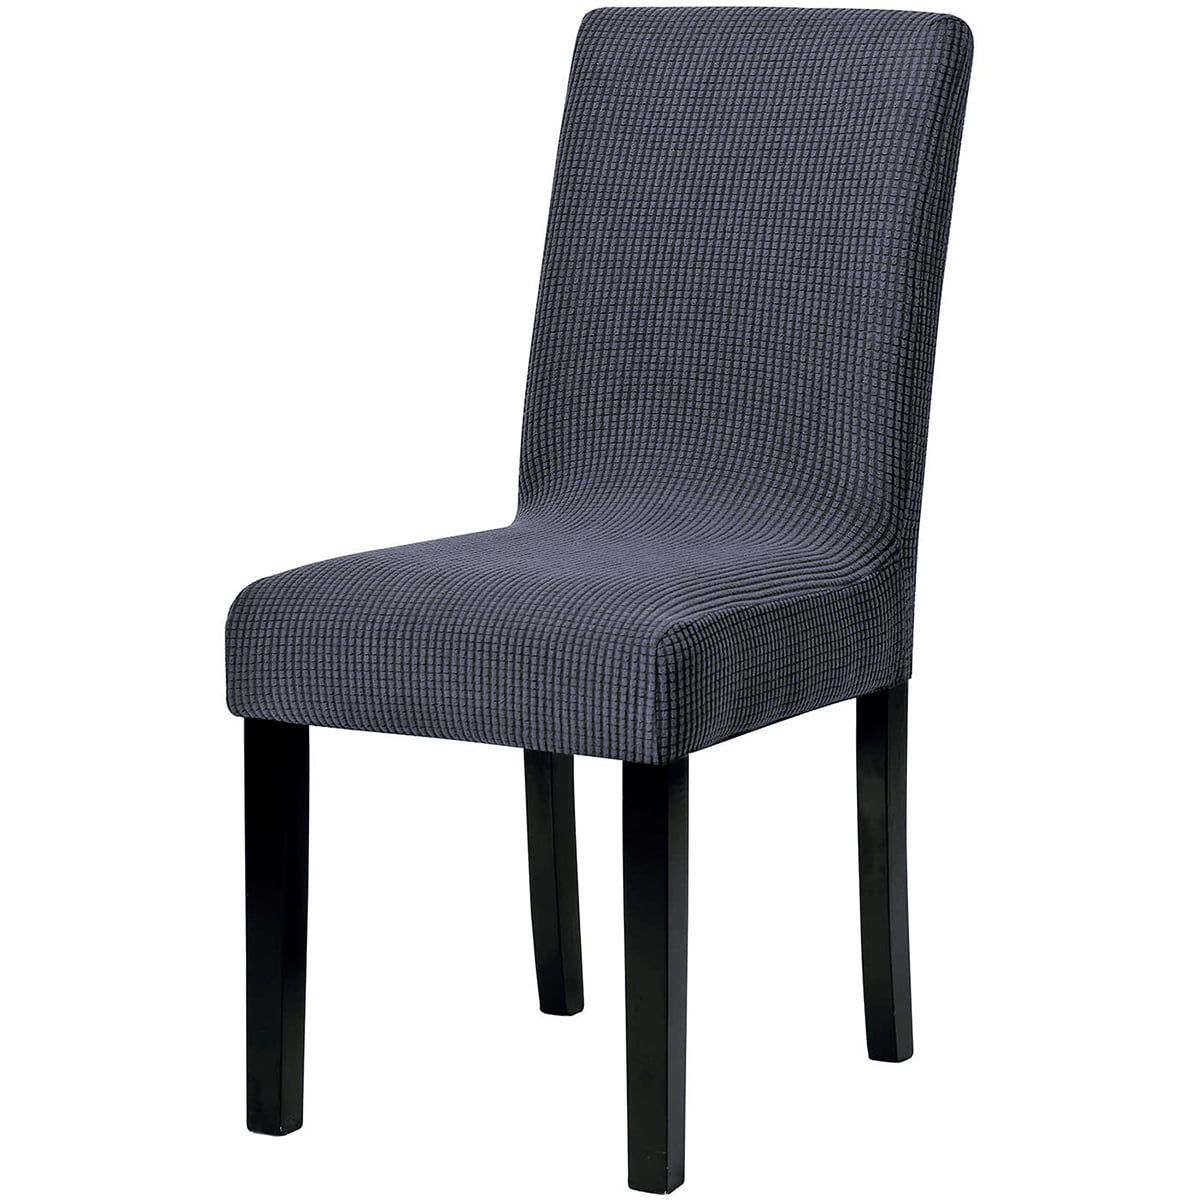 Details about   Wedding Dining Chair Cover Slipcovers Stretch Textured Grid Seat Protector 